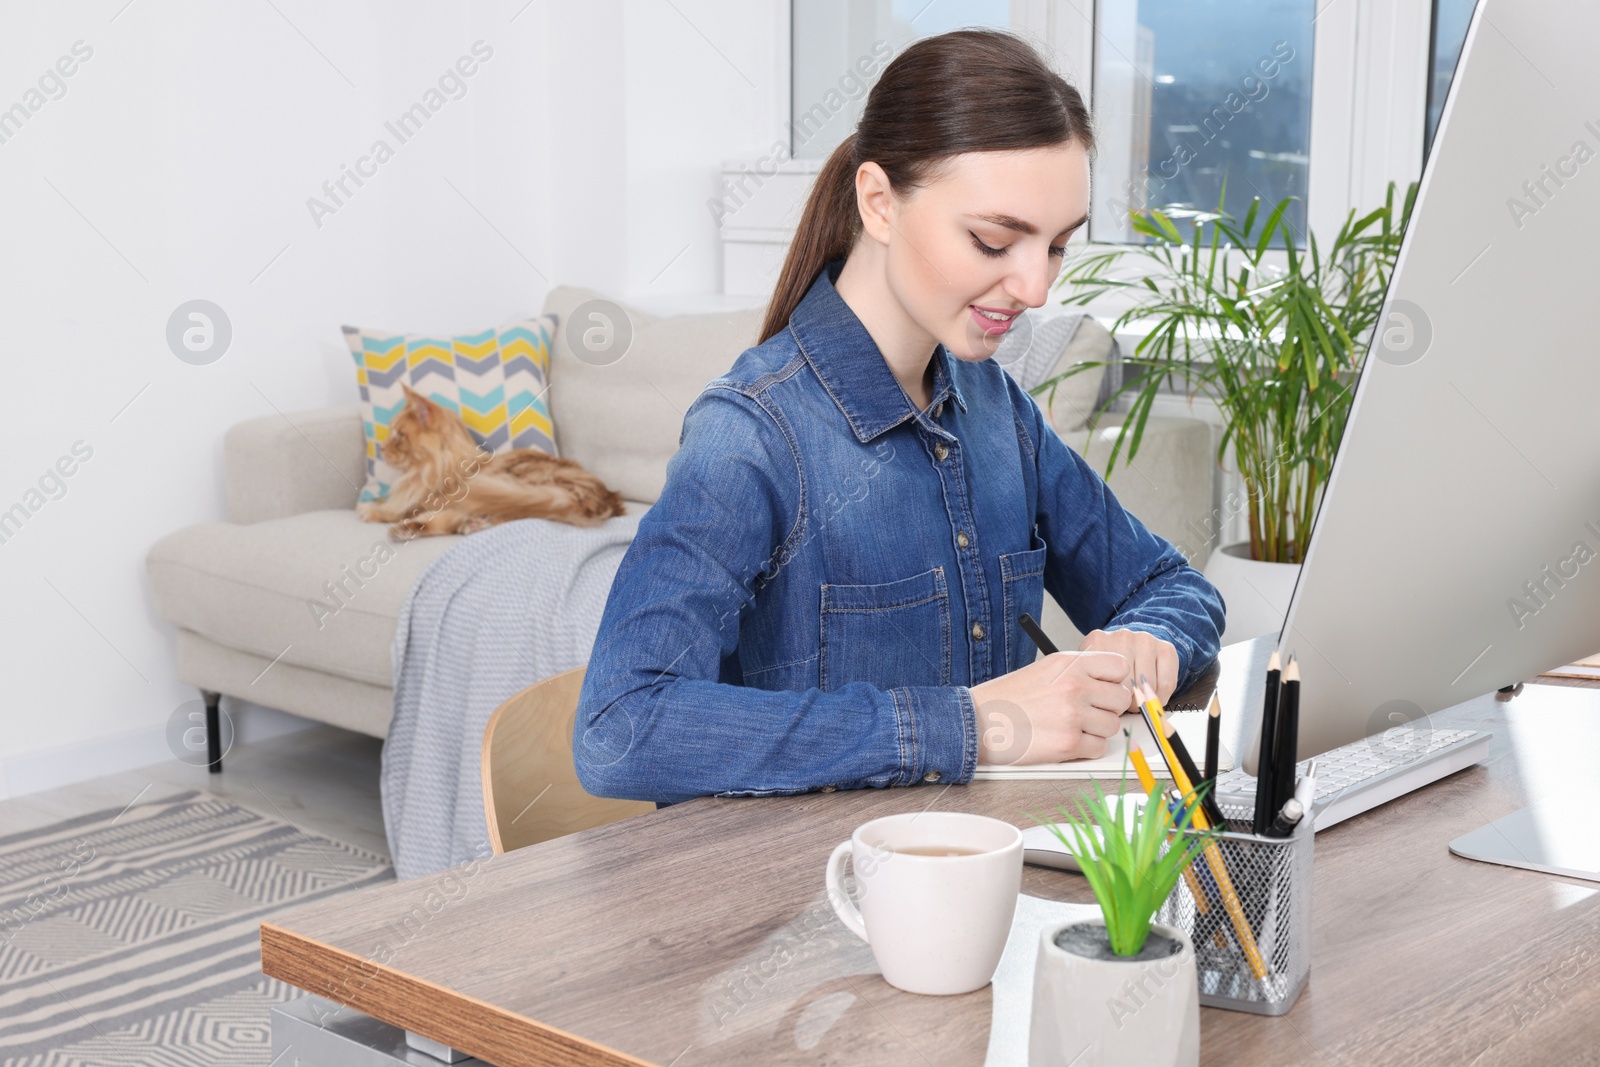 Photo of Woman working at desk and cat lying on sofa in room. Home office